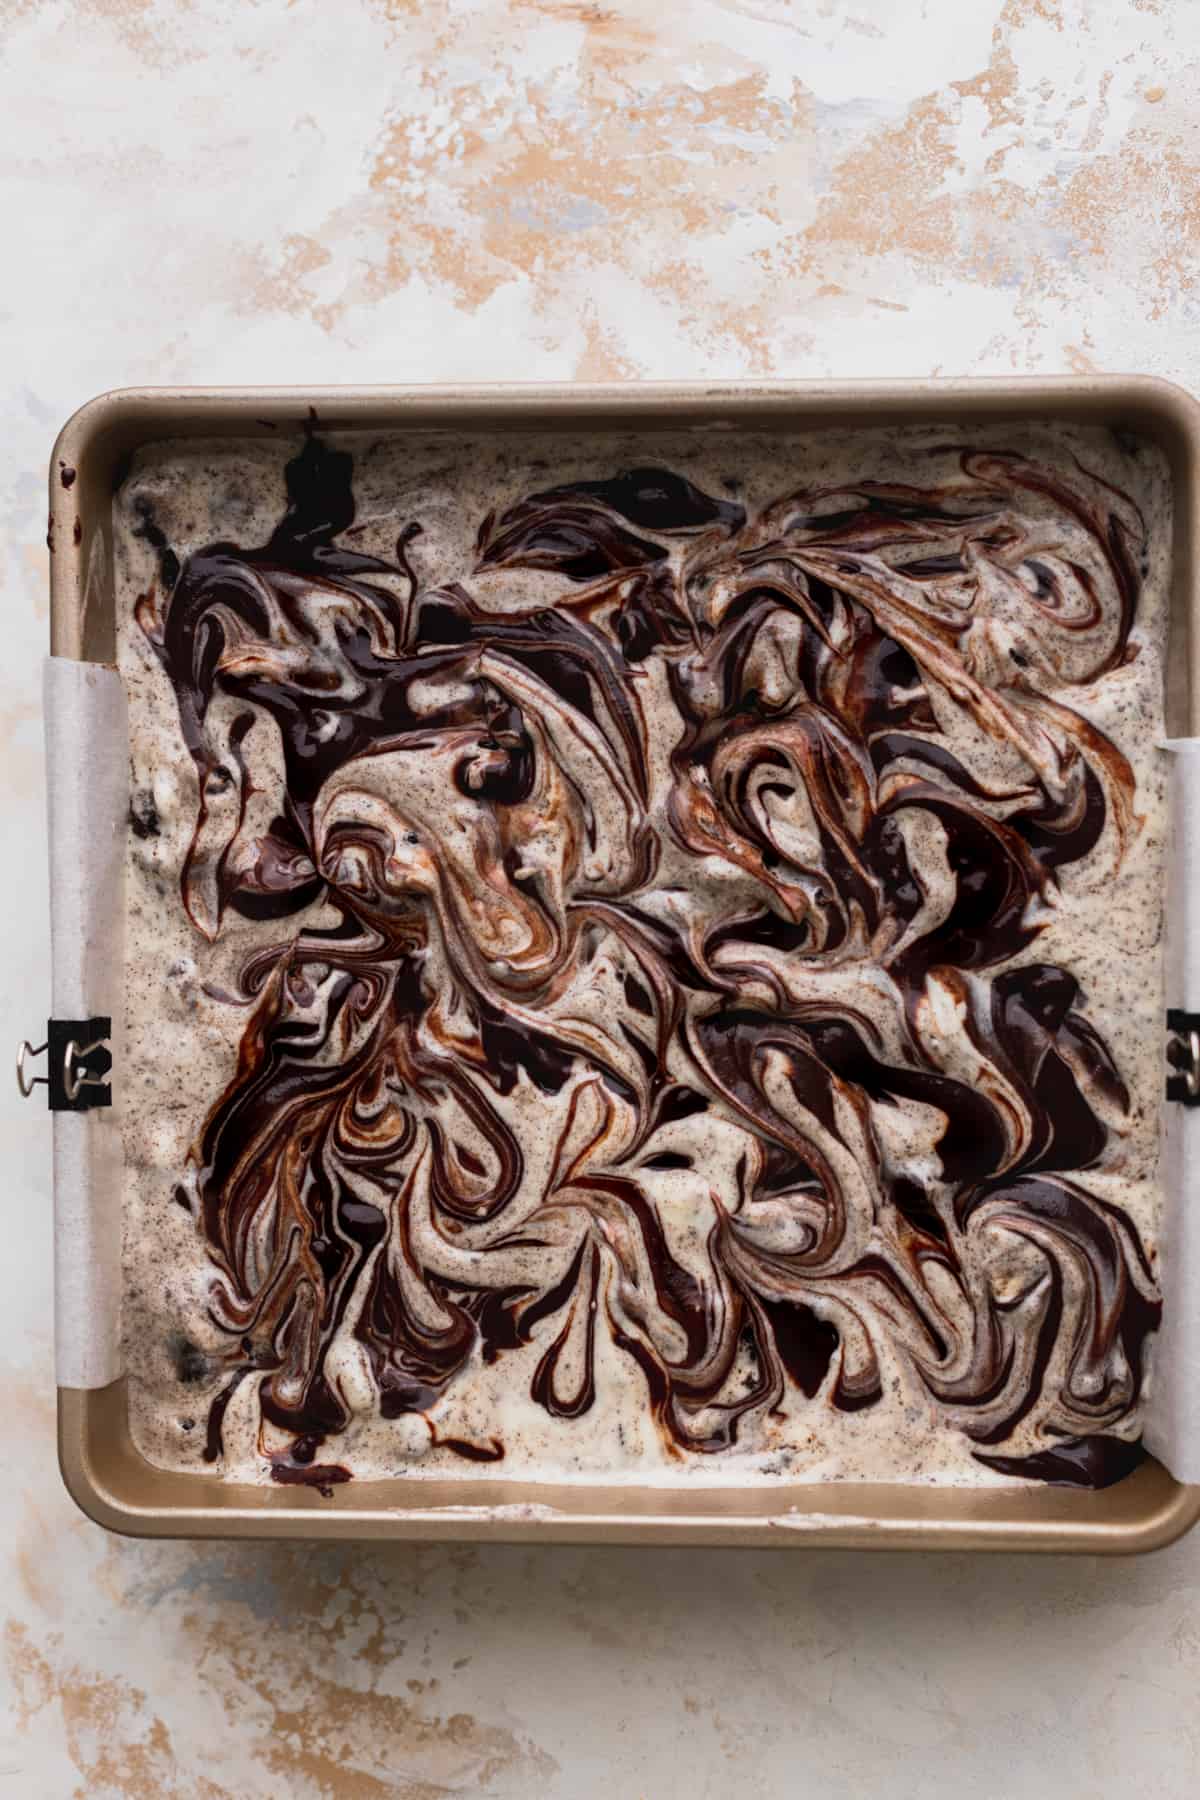 Brownie batter swirled on top of cheesecake batter.